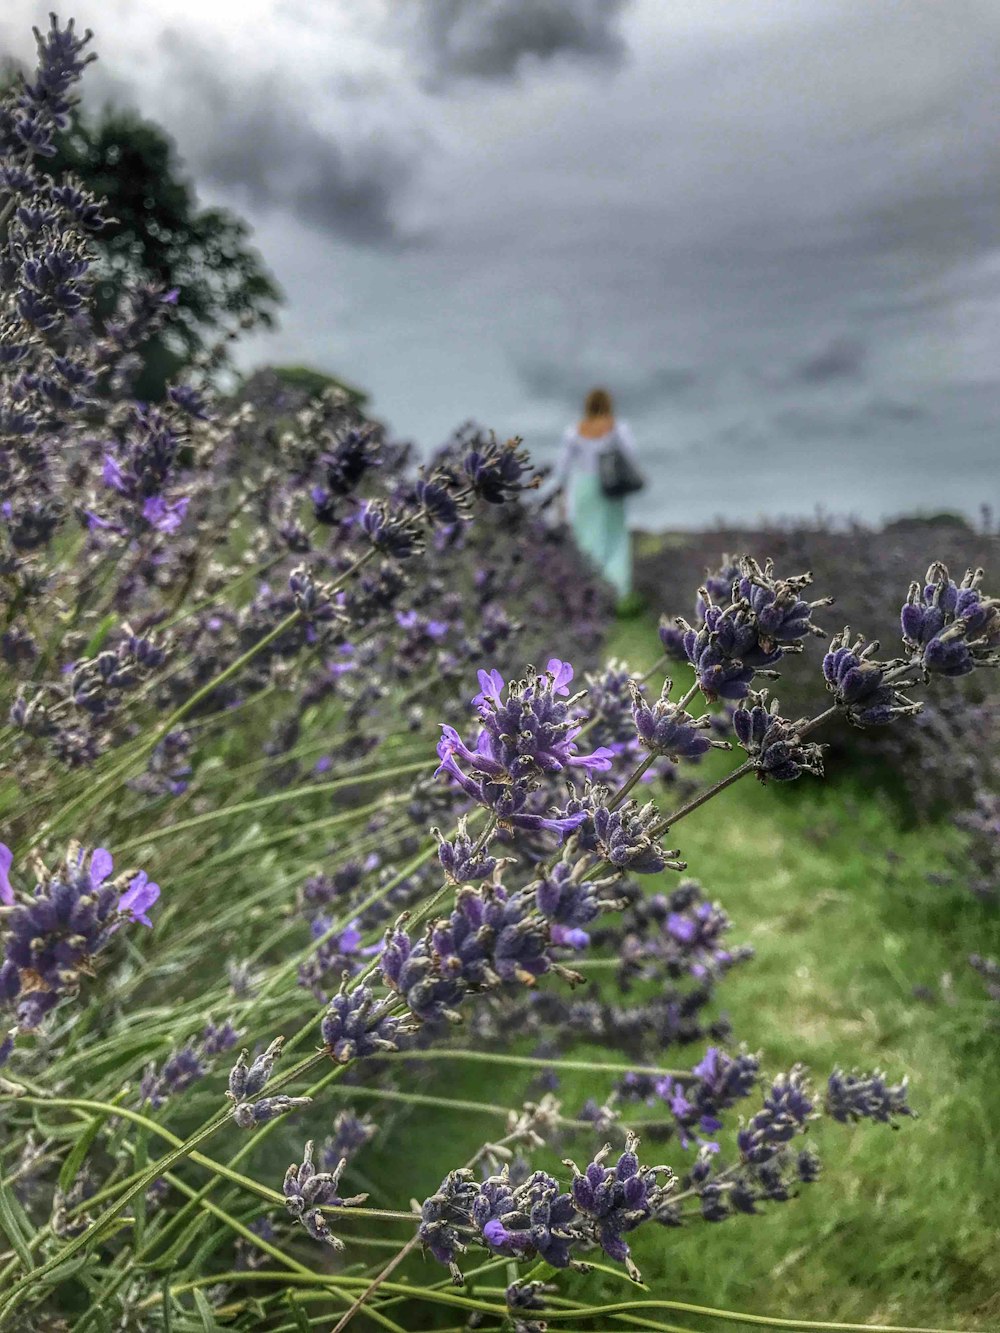 a person walking through a field of lavender flowers